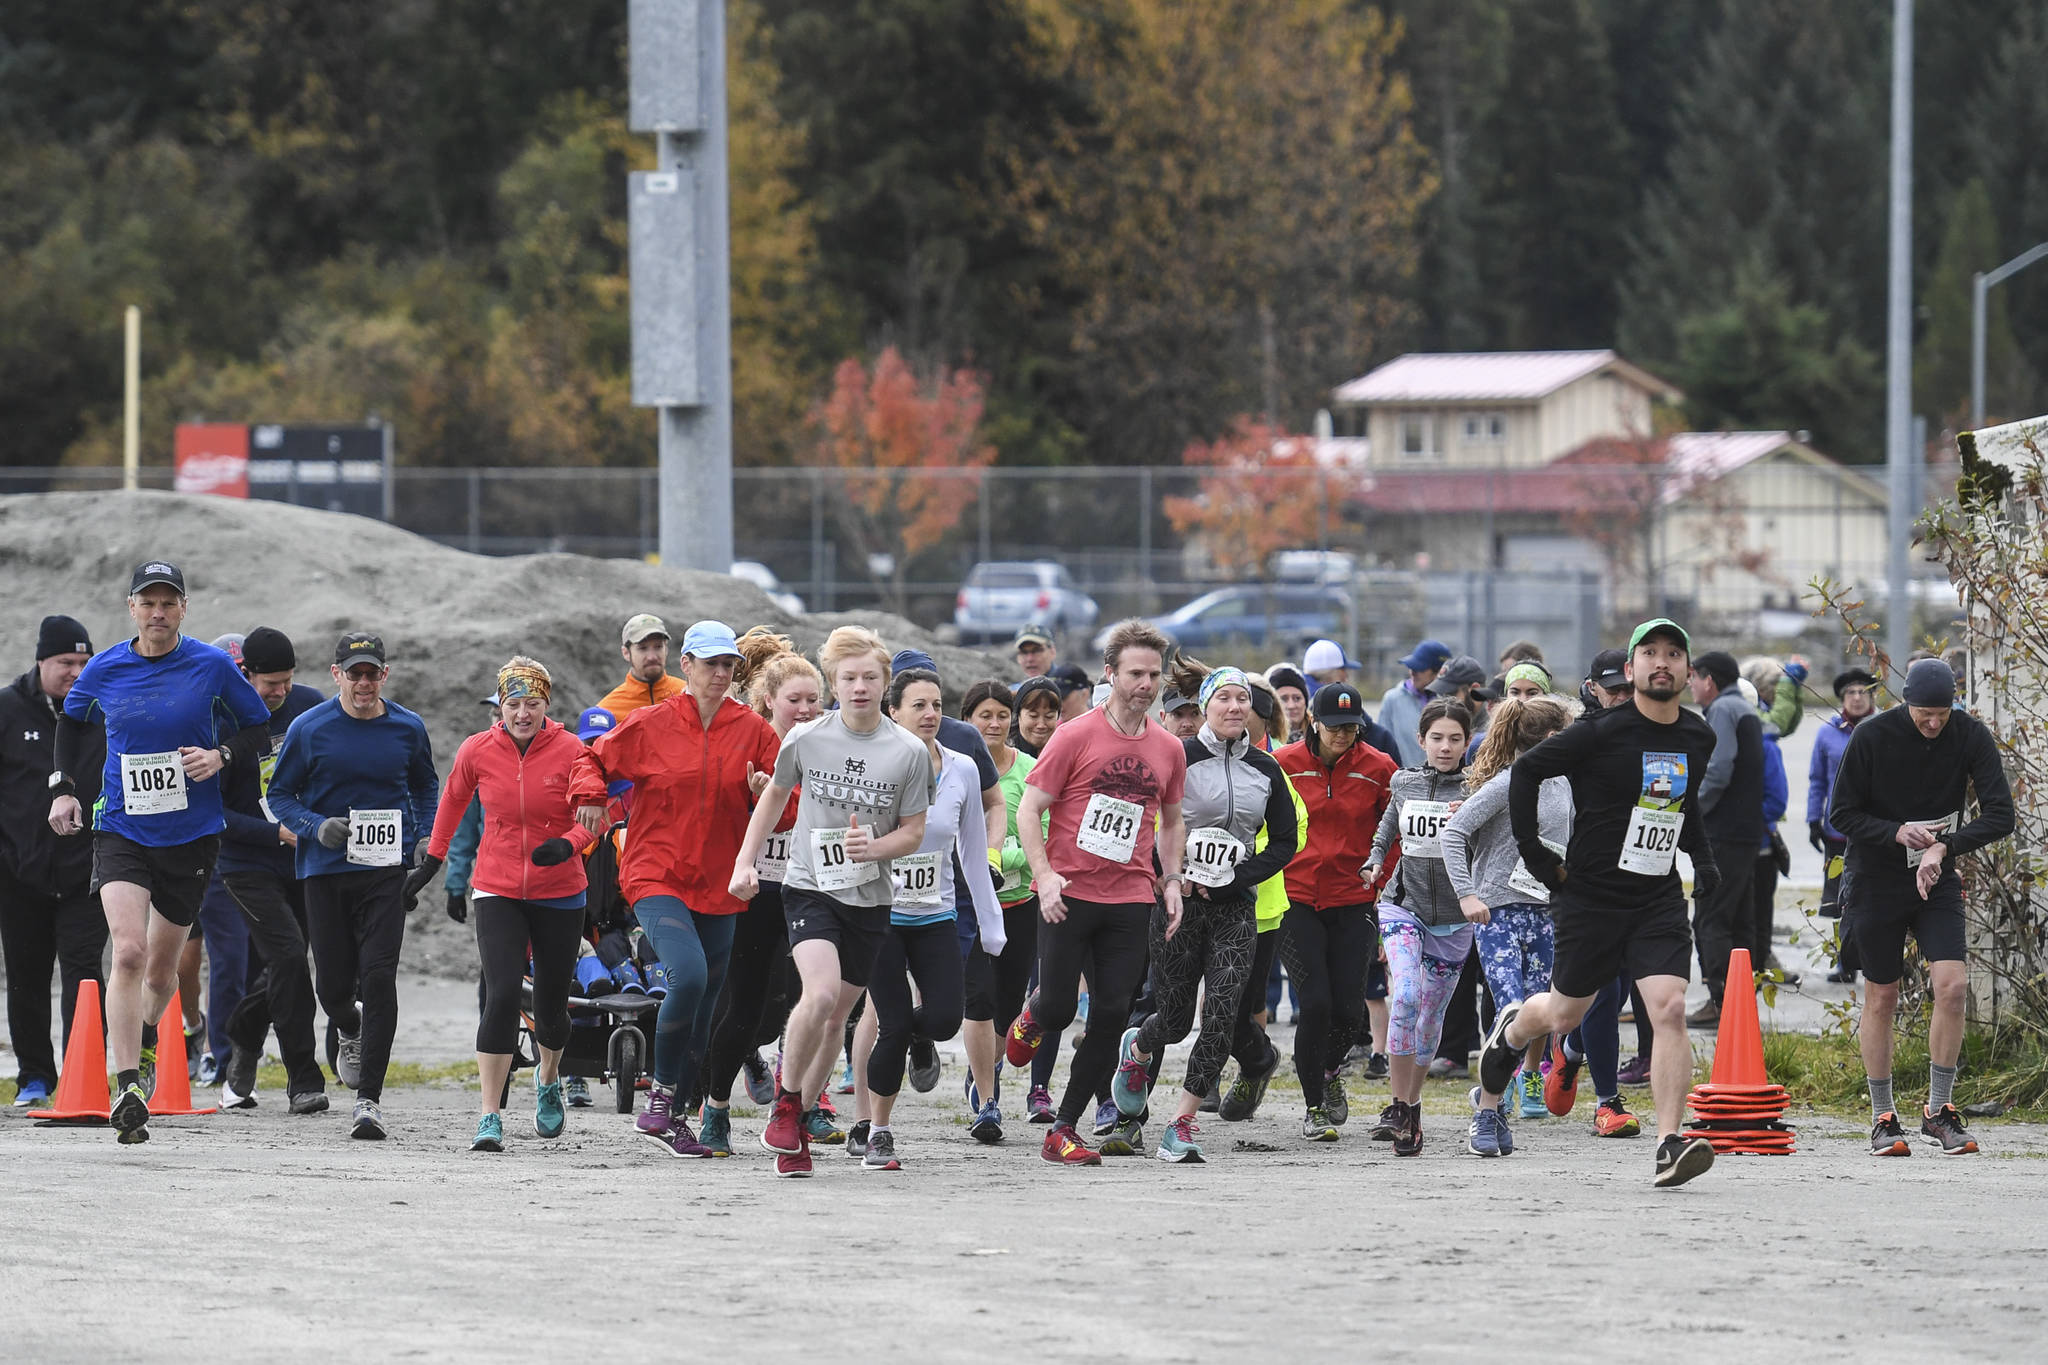 Juneau residents start the annual community mental health run, the Extra Tough 5K & 1 Mile Run, on Saturday, Oct. 12, 2019, at Riverbend Elementary School. The run is sponsored by National Alliance on Mental Illness (NAMI) Juneau. (Michael Penn | Juneau Empire)